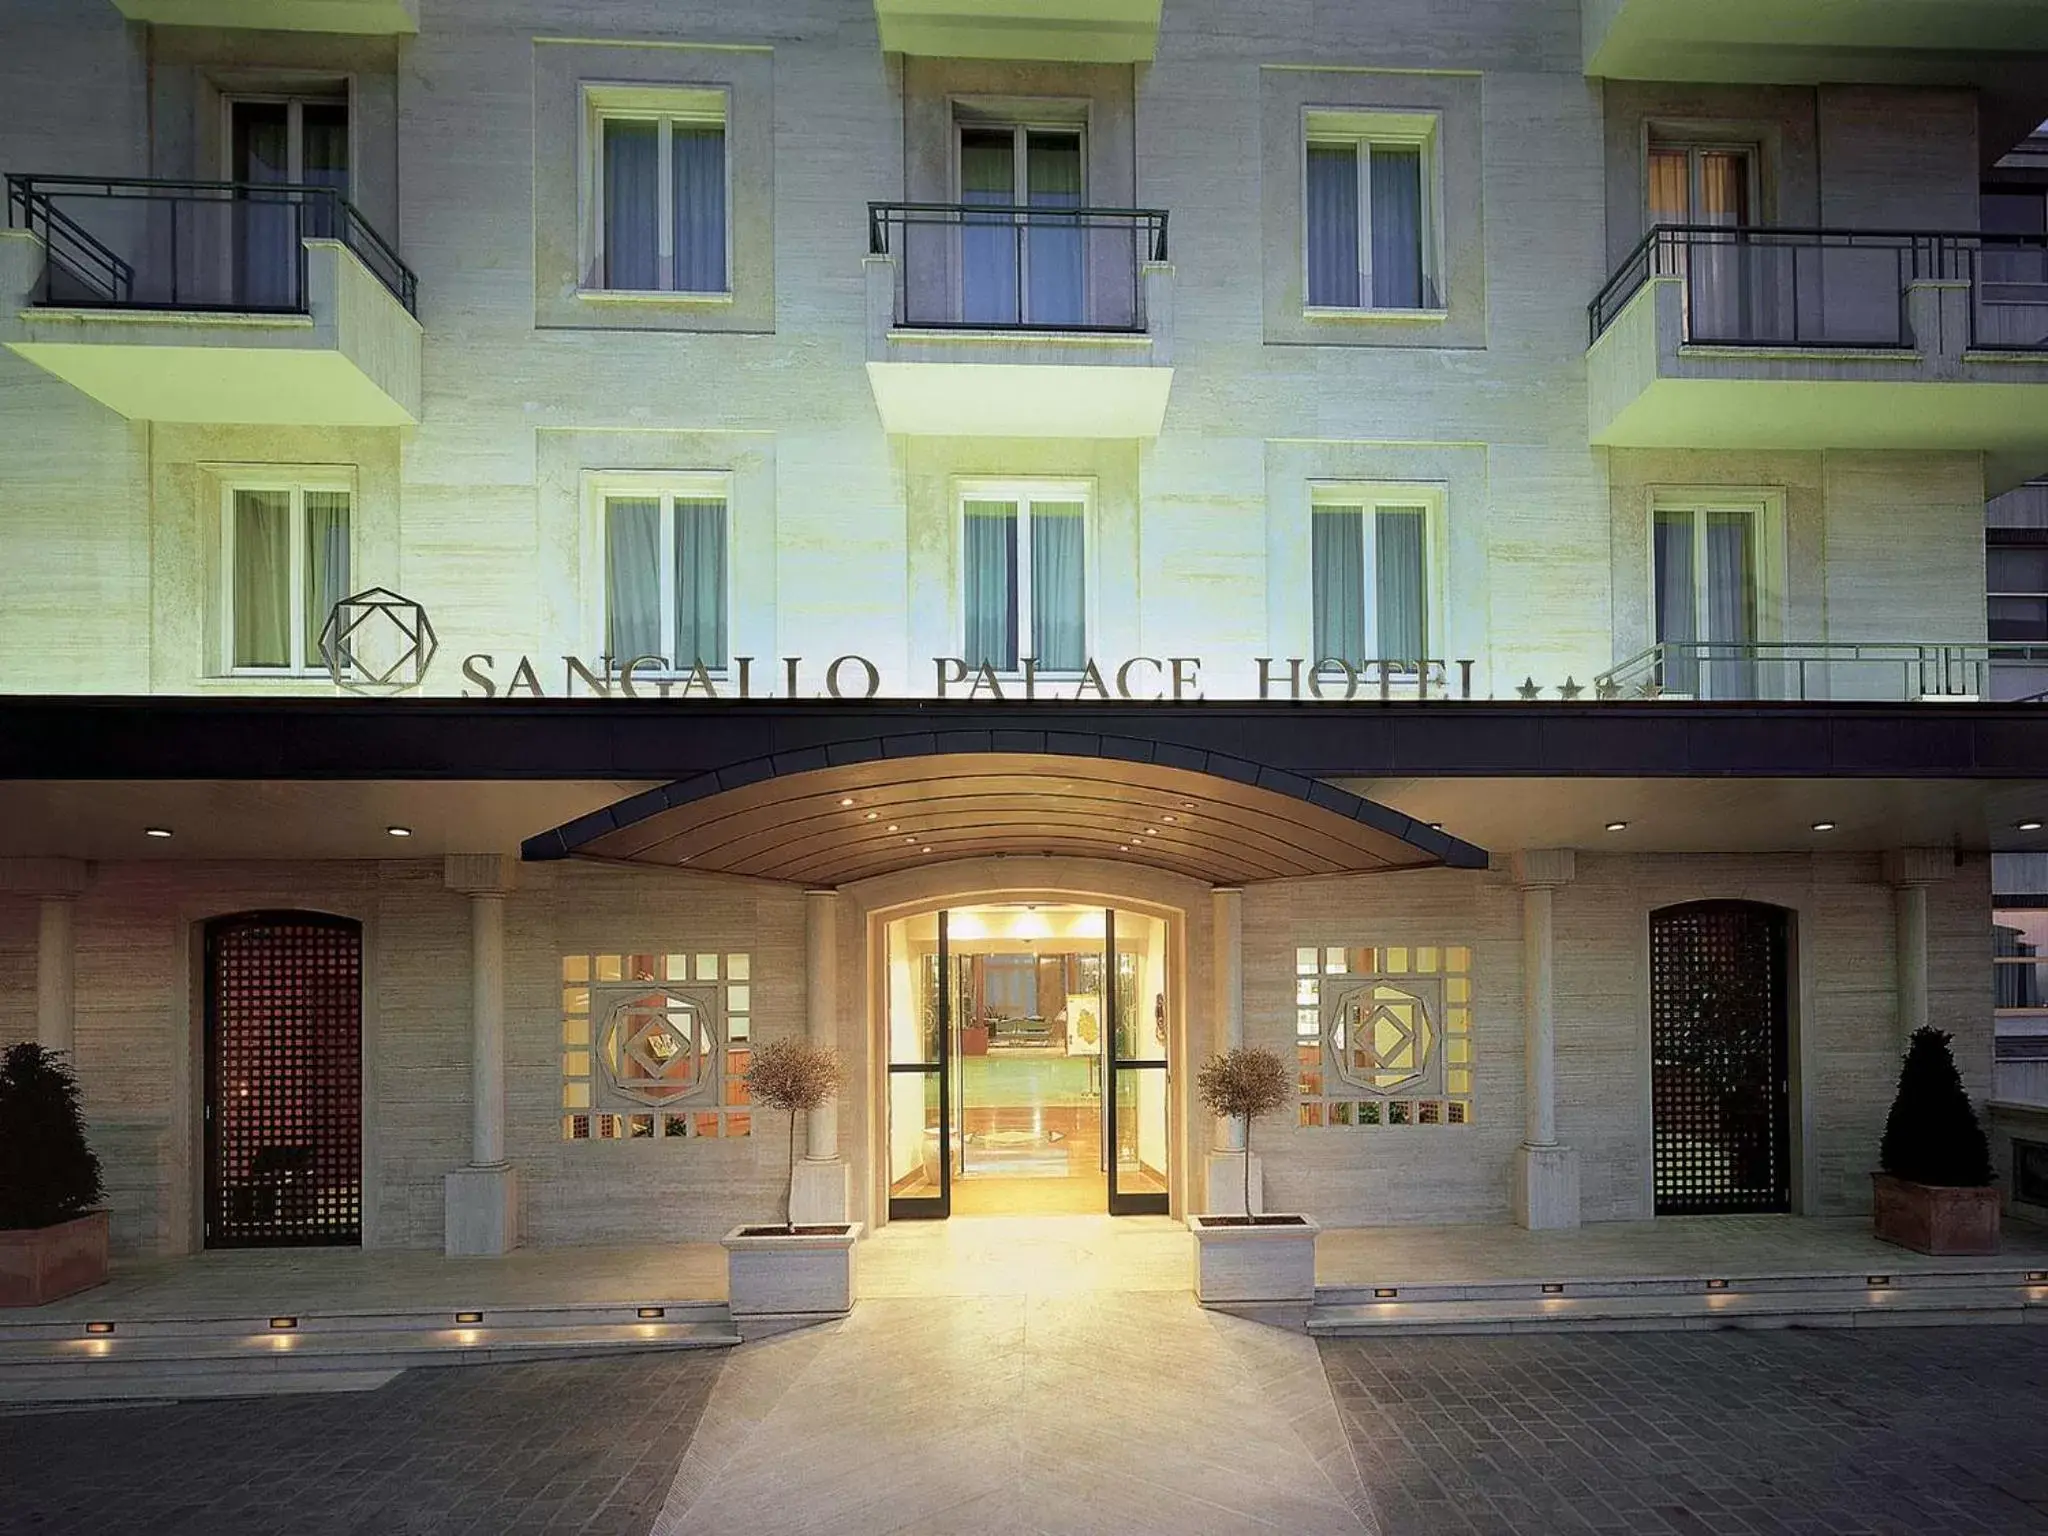 Property building in Sangallo Palace